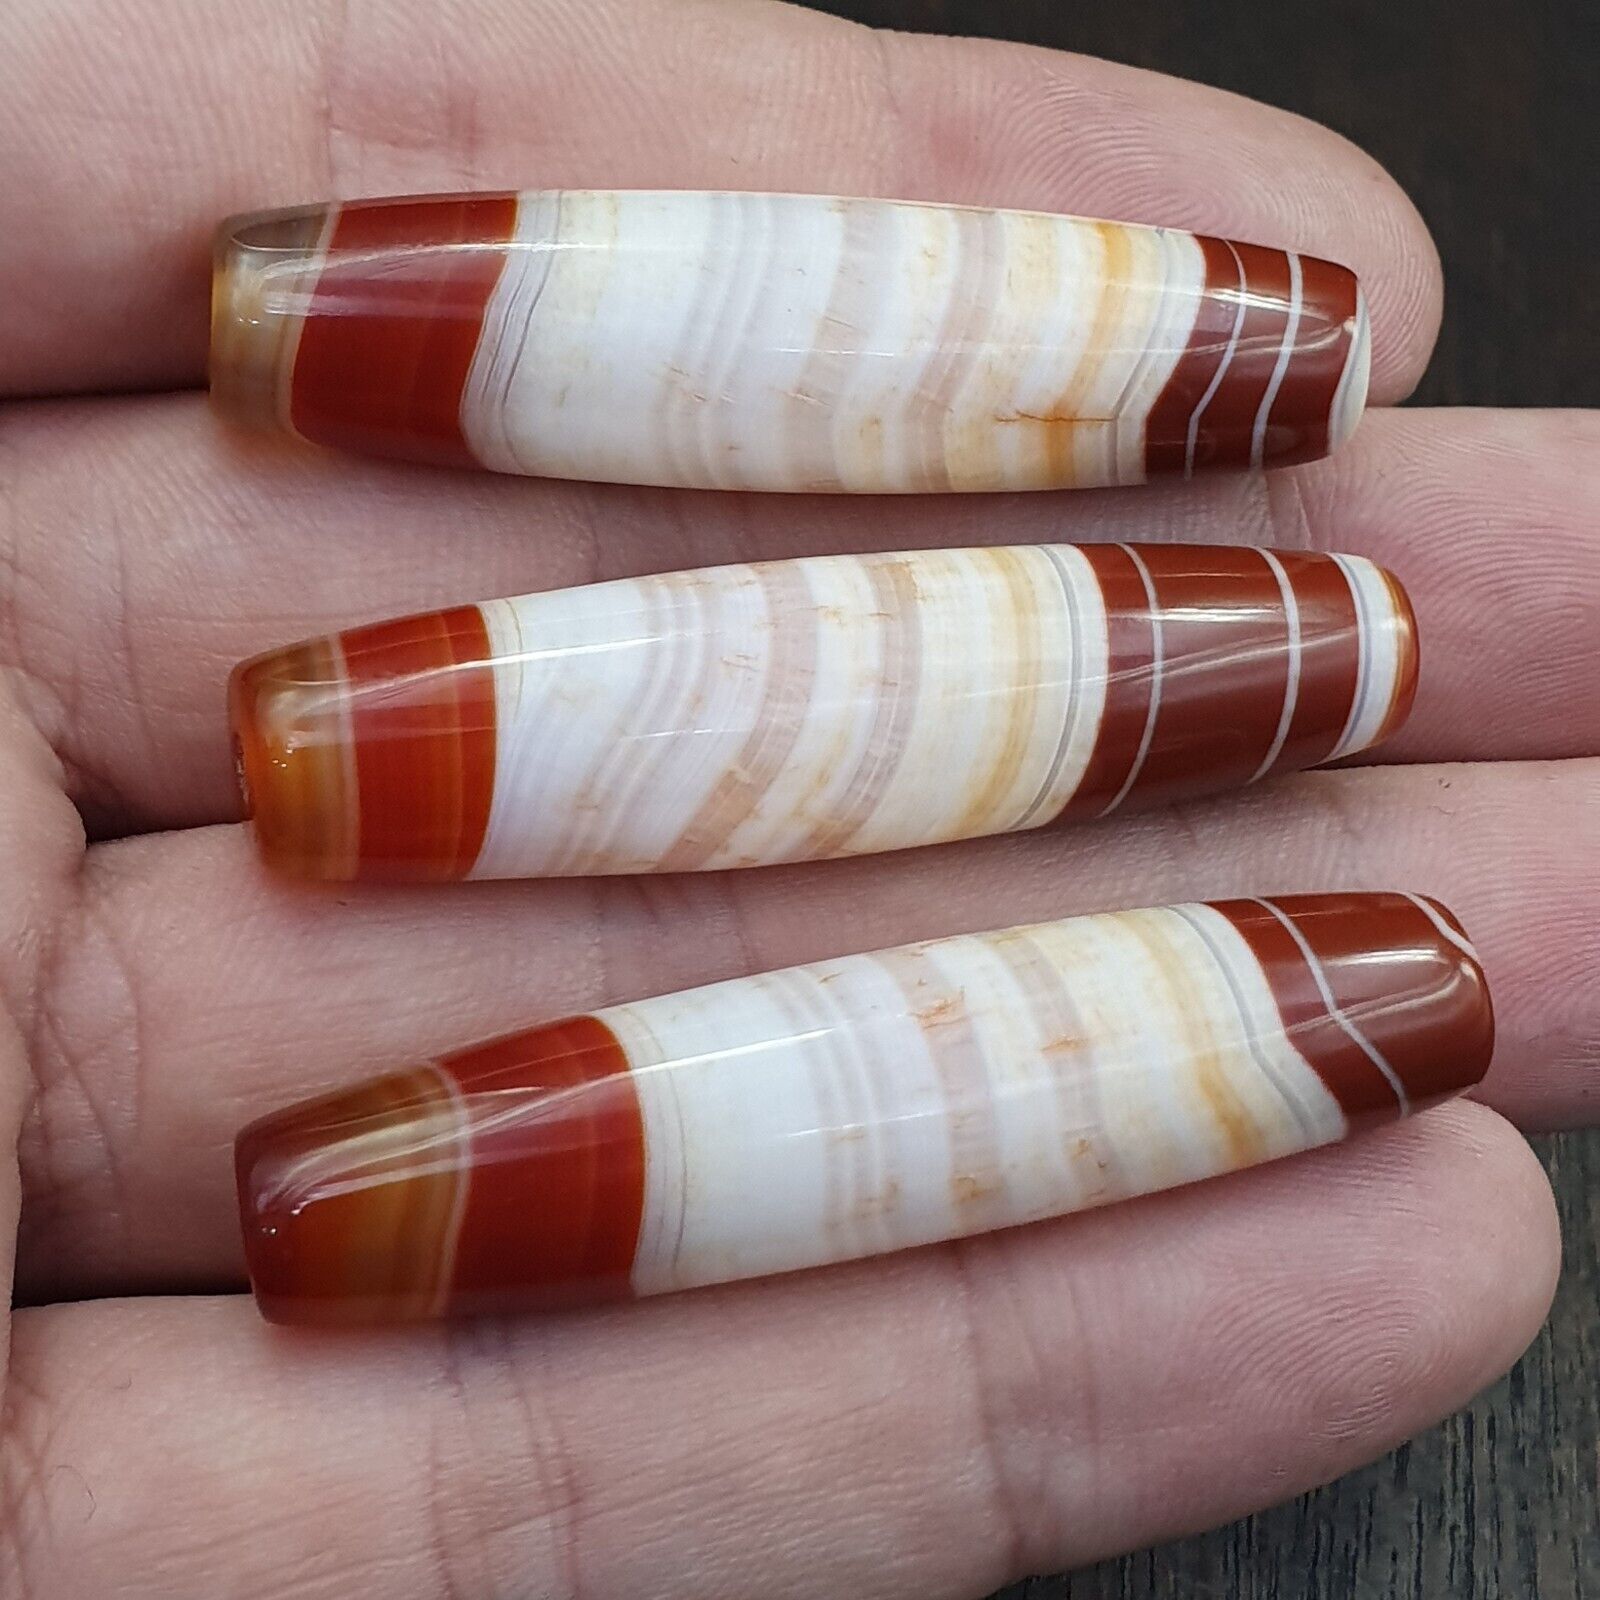 "Image of 3 rare and vintage Himalayan Tibetan amulet beads made from red agate, showcasing very rare and intricate patterns, believed to possess spiritual powers and bring protection, good fortune, and blessings in Tibetan Buddhism."